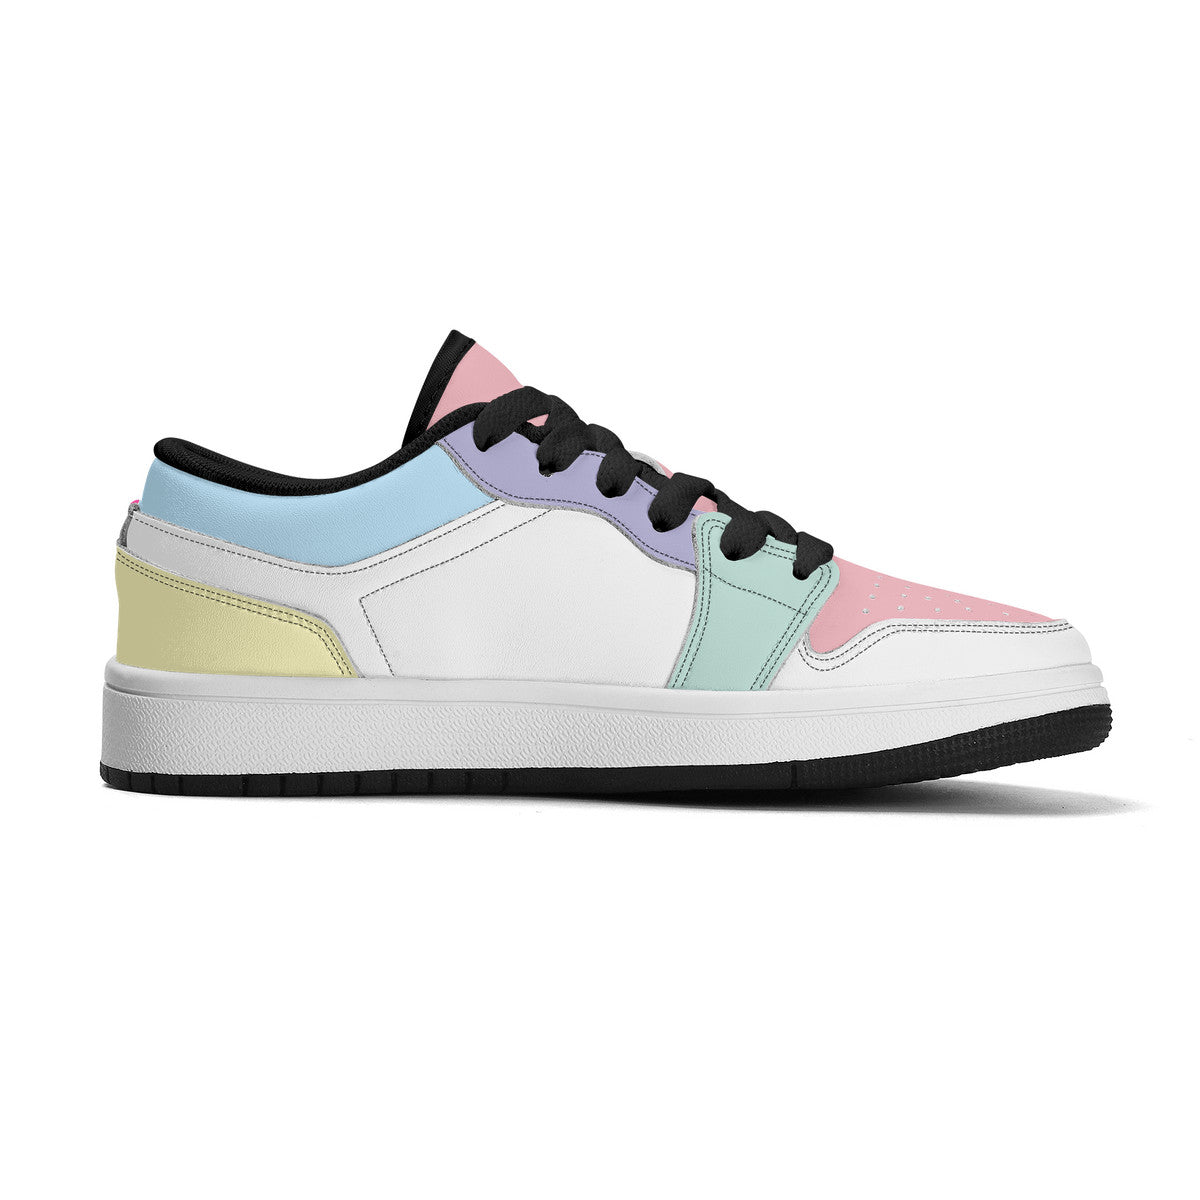 Personalize Your Own Kids Low-Top PU Leather Sneakers-Pastel Colors